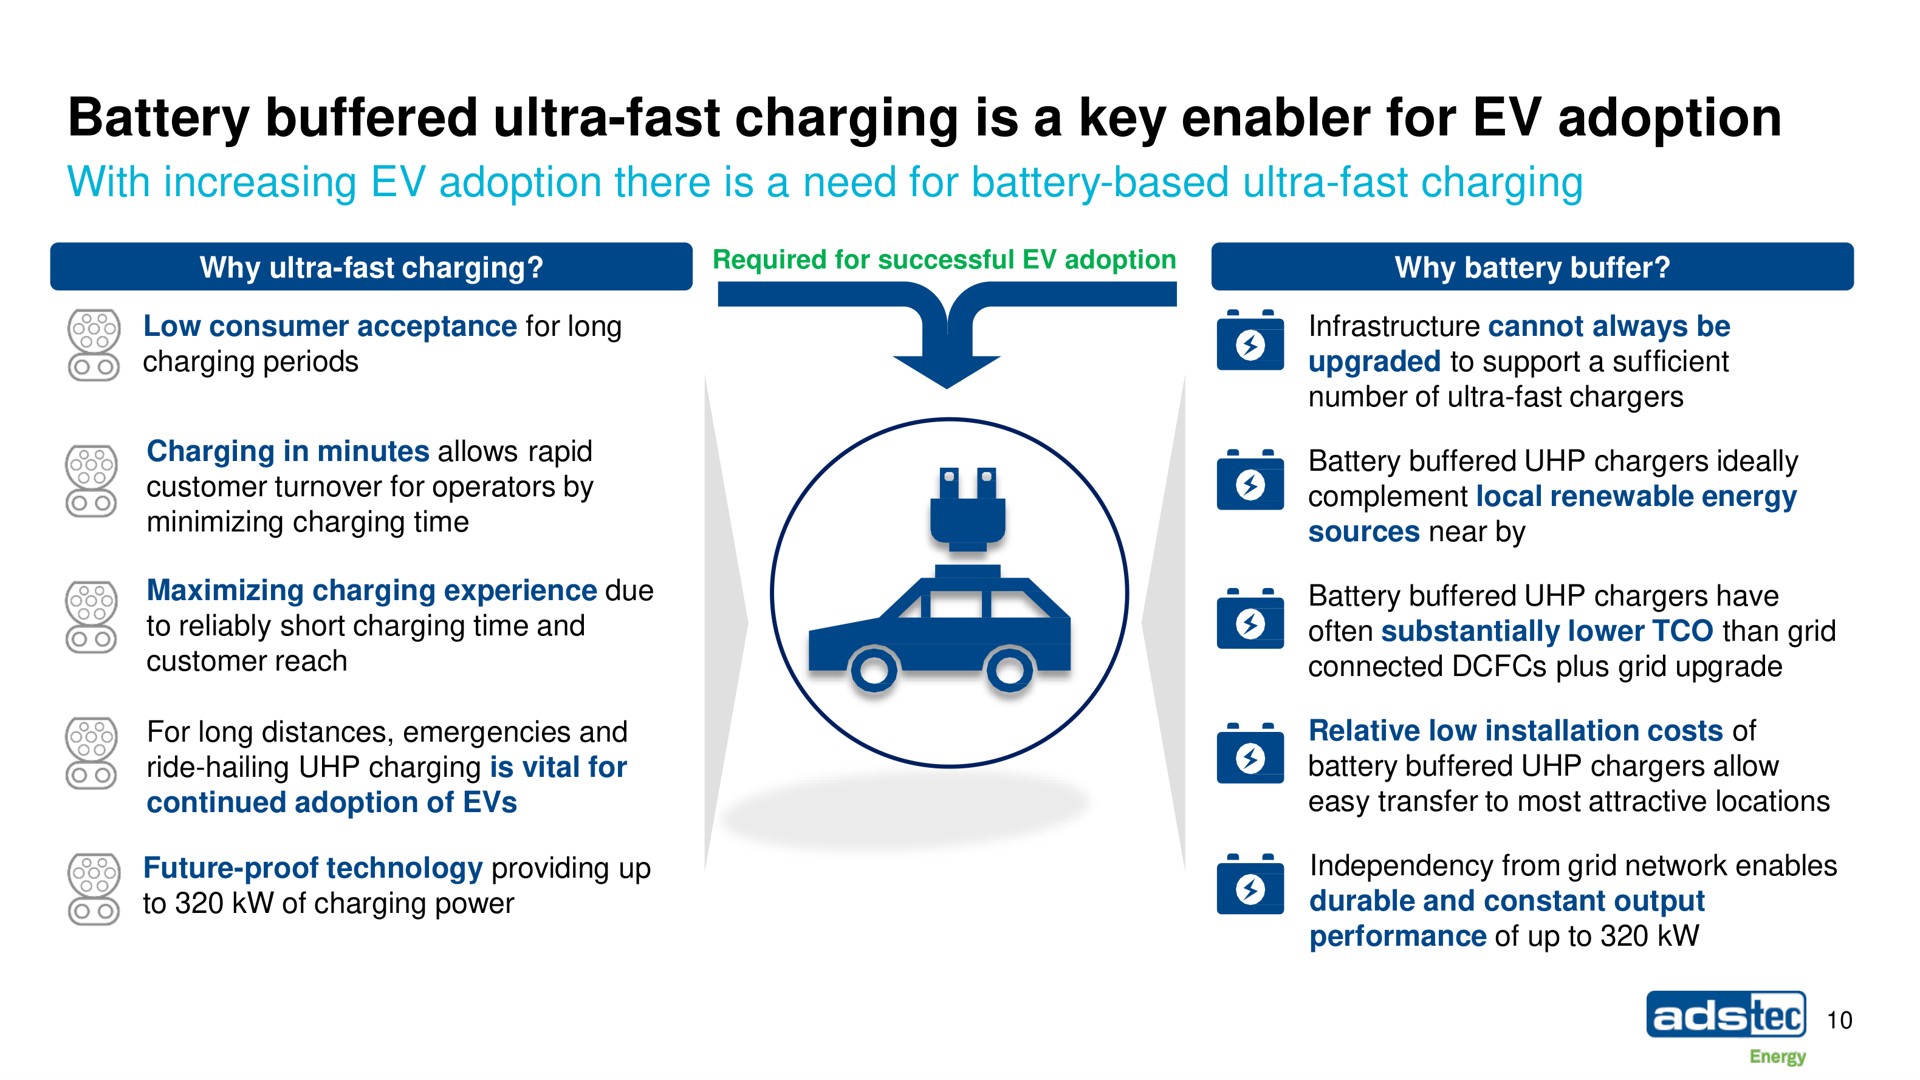 battery buffered ultra fast charging is a key enabler for adoption | ads-tec Energy